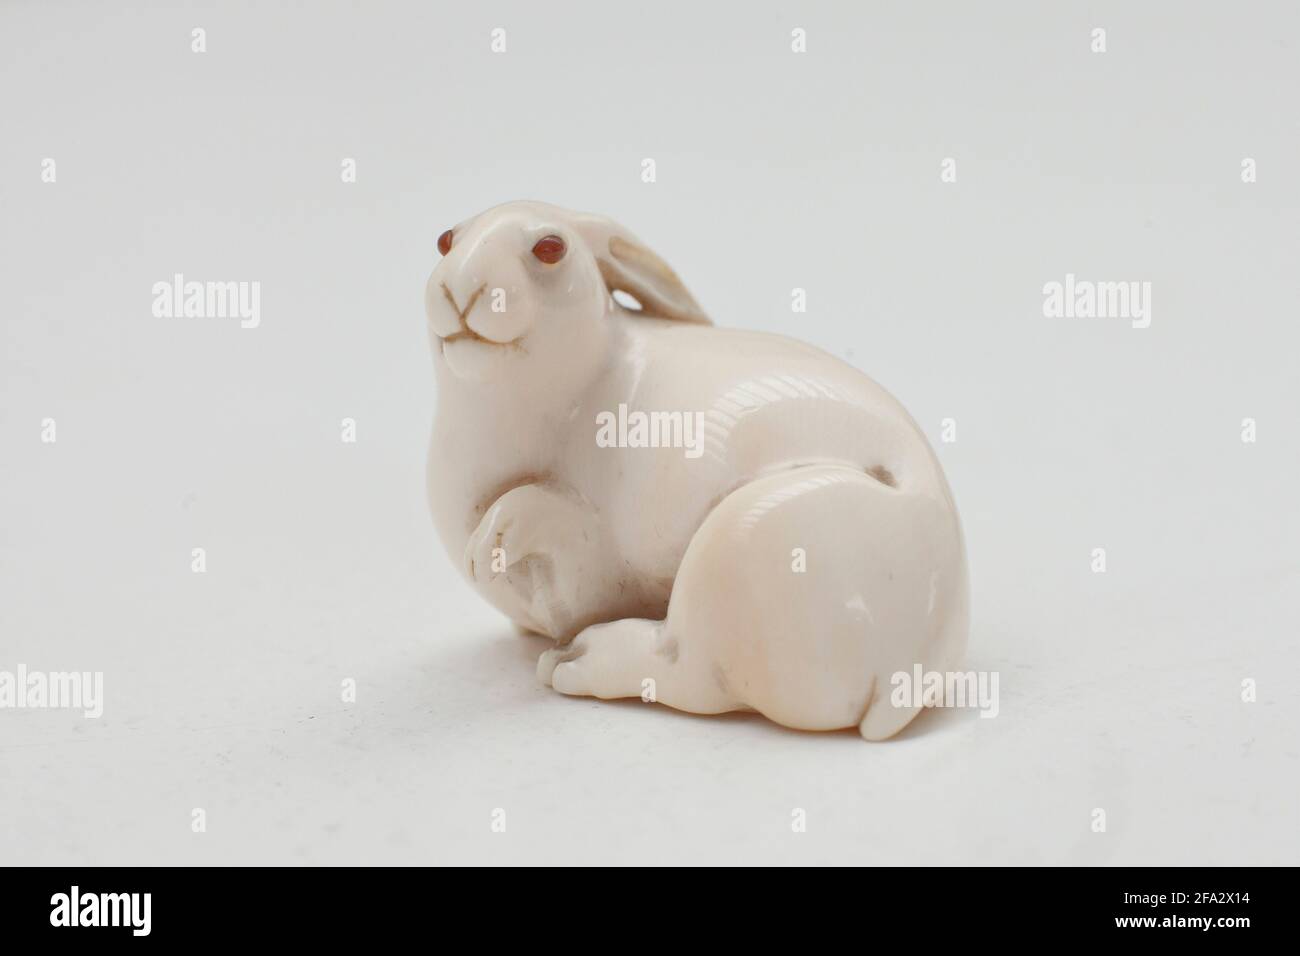 Natsuke The Hare belonging to Edmund De Waal , author of The Hare With Amber Eyes and ceramic artist photographed during an interview at his studio in Stock Photo